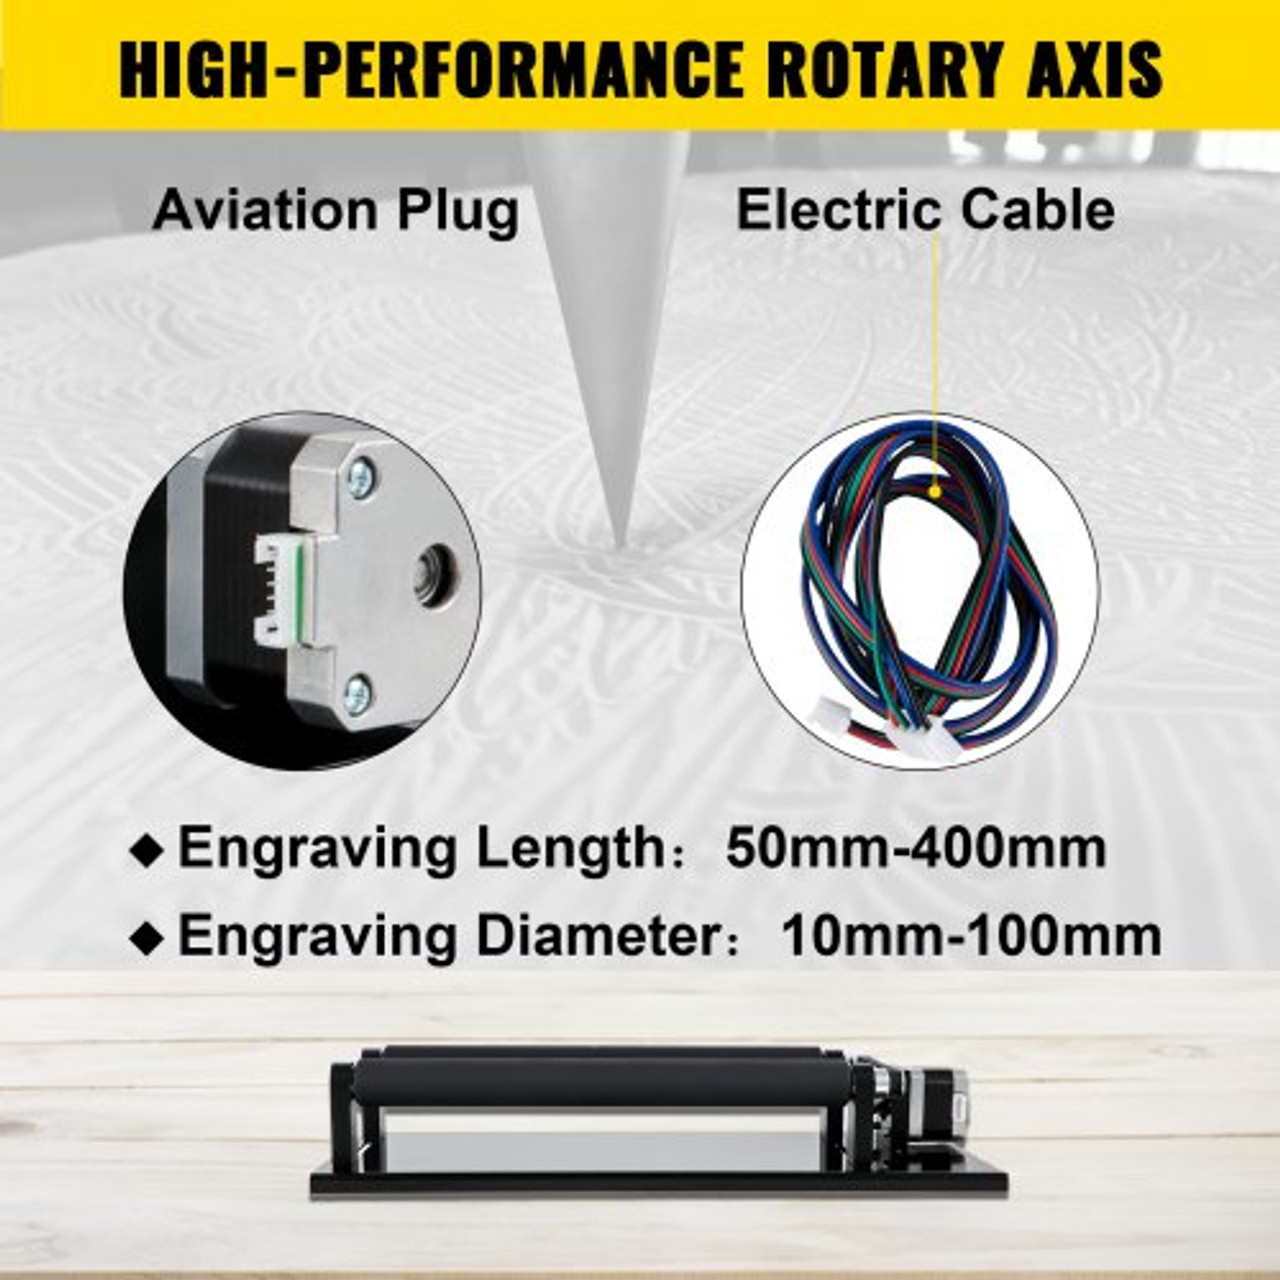 Rotary Axis Attachment, 4 Wheels Laser Rotary Attachment, 42 Stepper Motor Laser Cutter Rotary, 50 mm -400 mm Laser Rotary Axis for Engraving Cutting Machine Spherical Carving Cylinder Carving